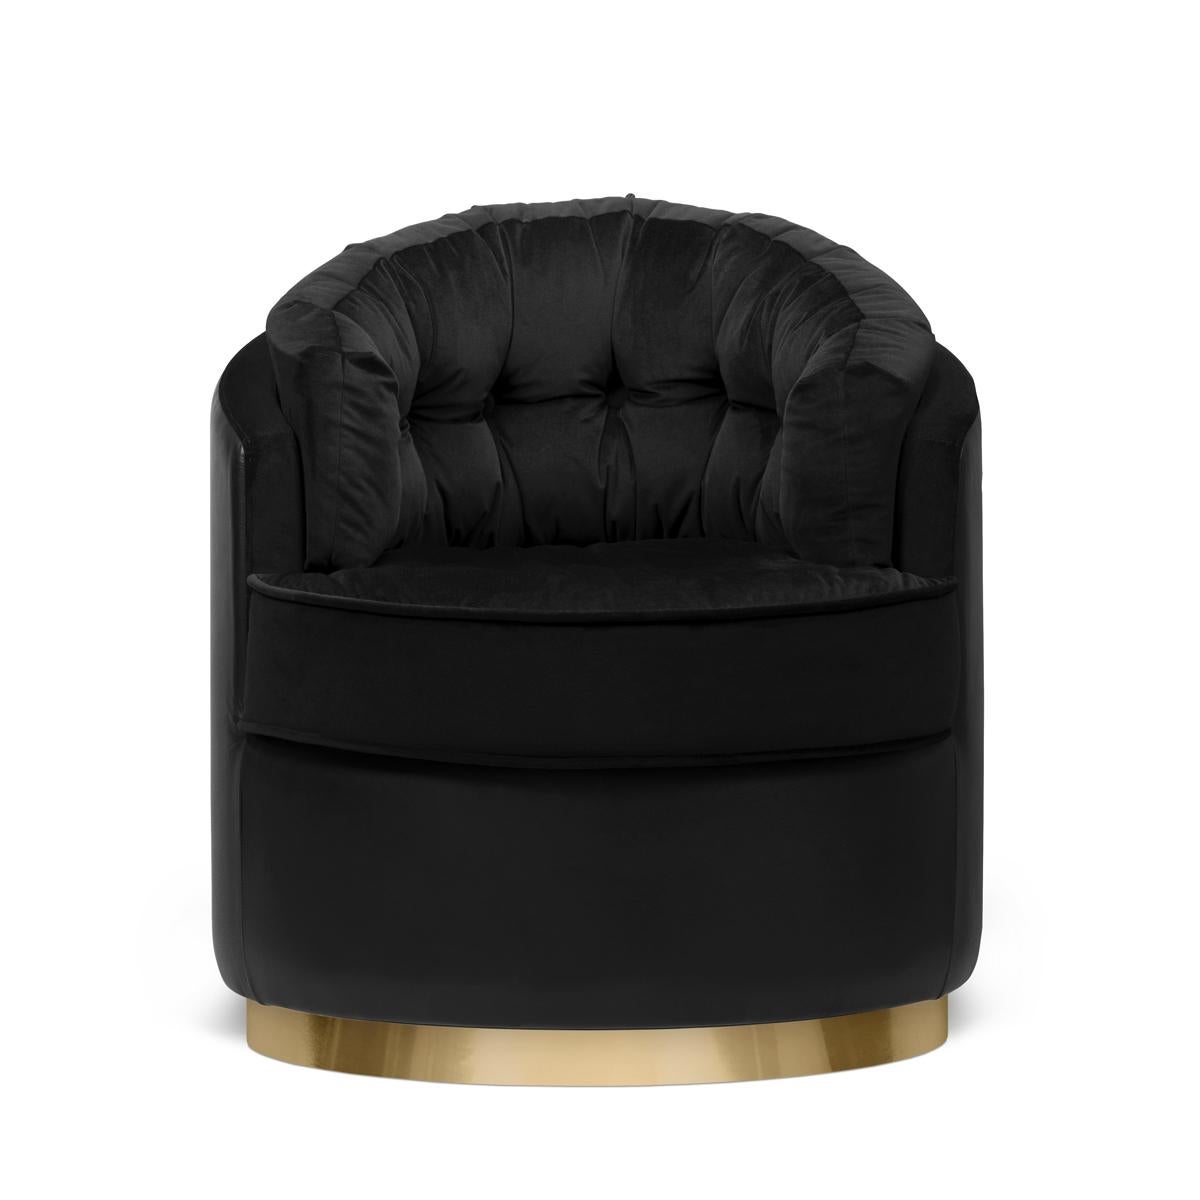 Armchair Tempo with structure in solid wood
upholstered and covered with black velvet high
quality fabric. Back covered with black genuine
leather. With polished brass base.